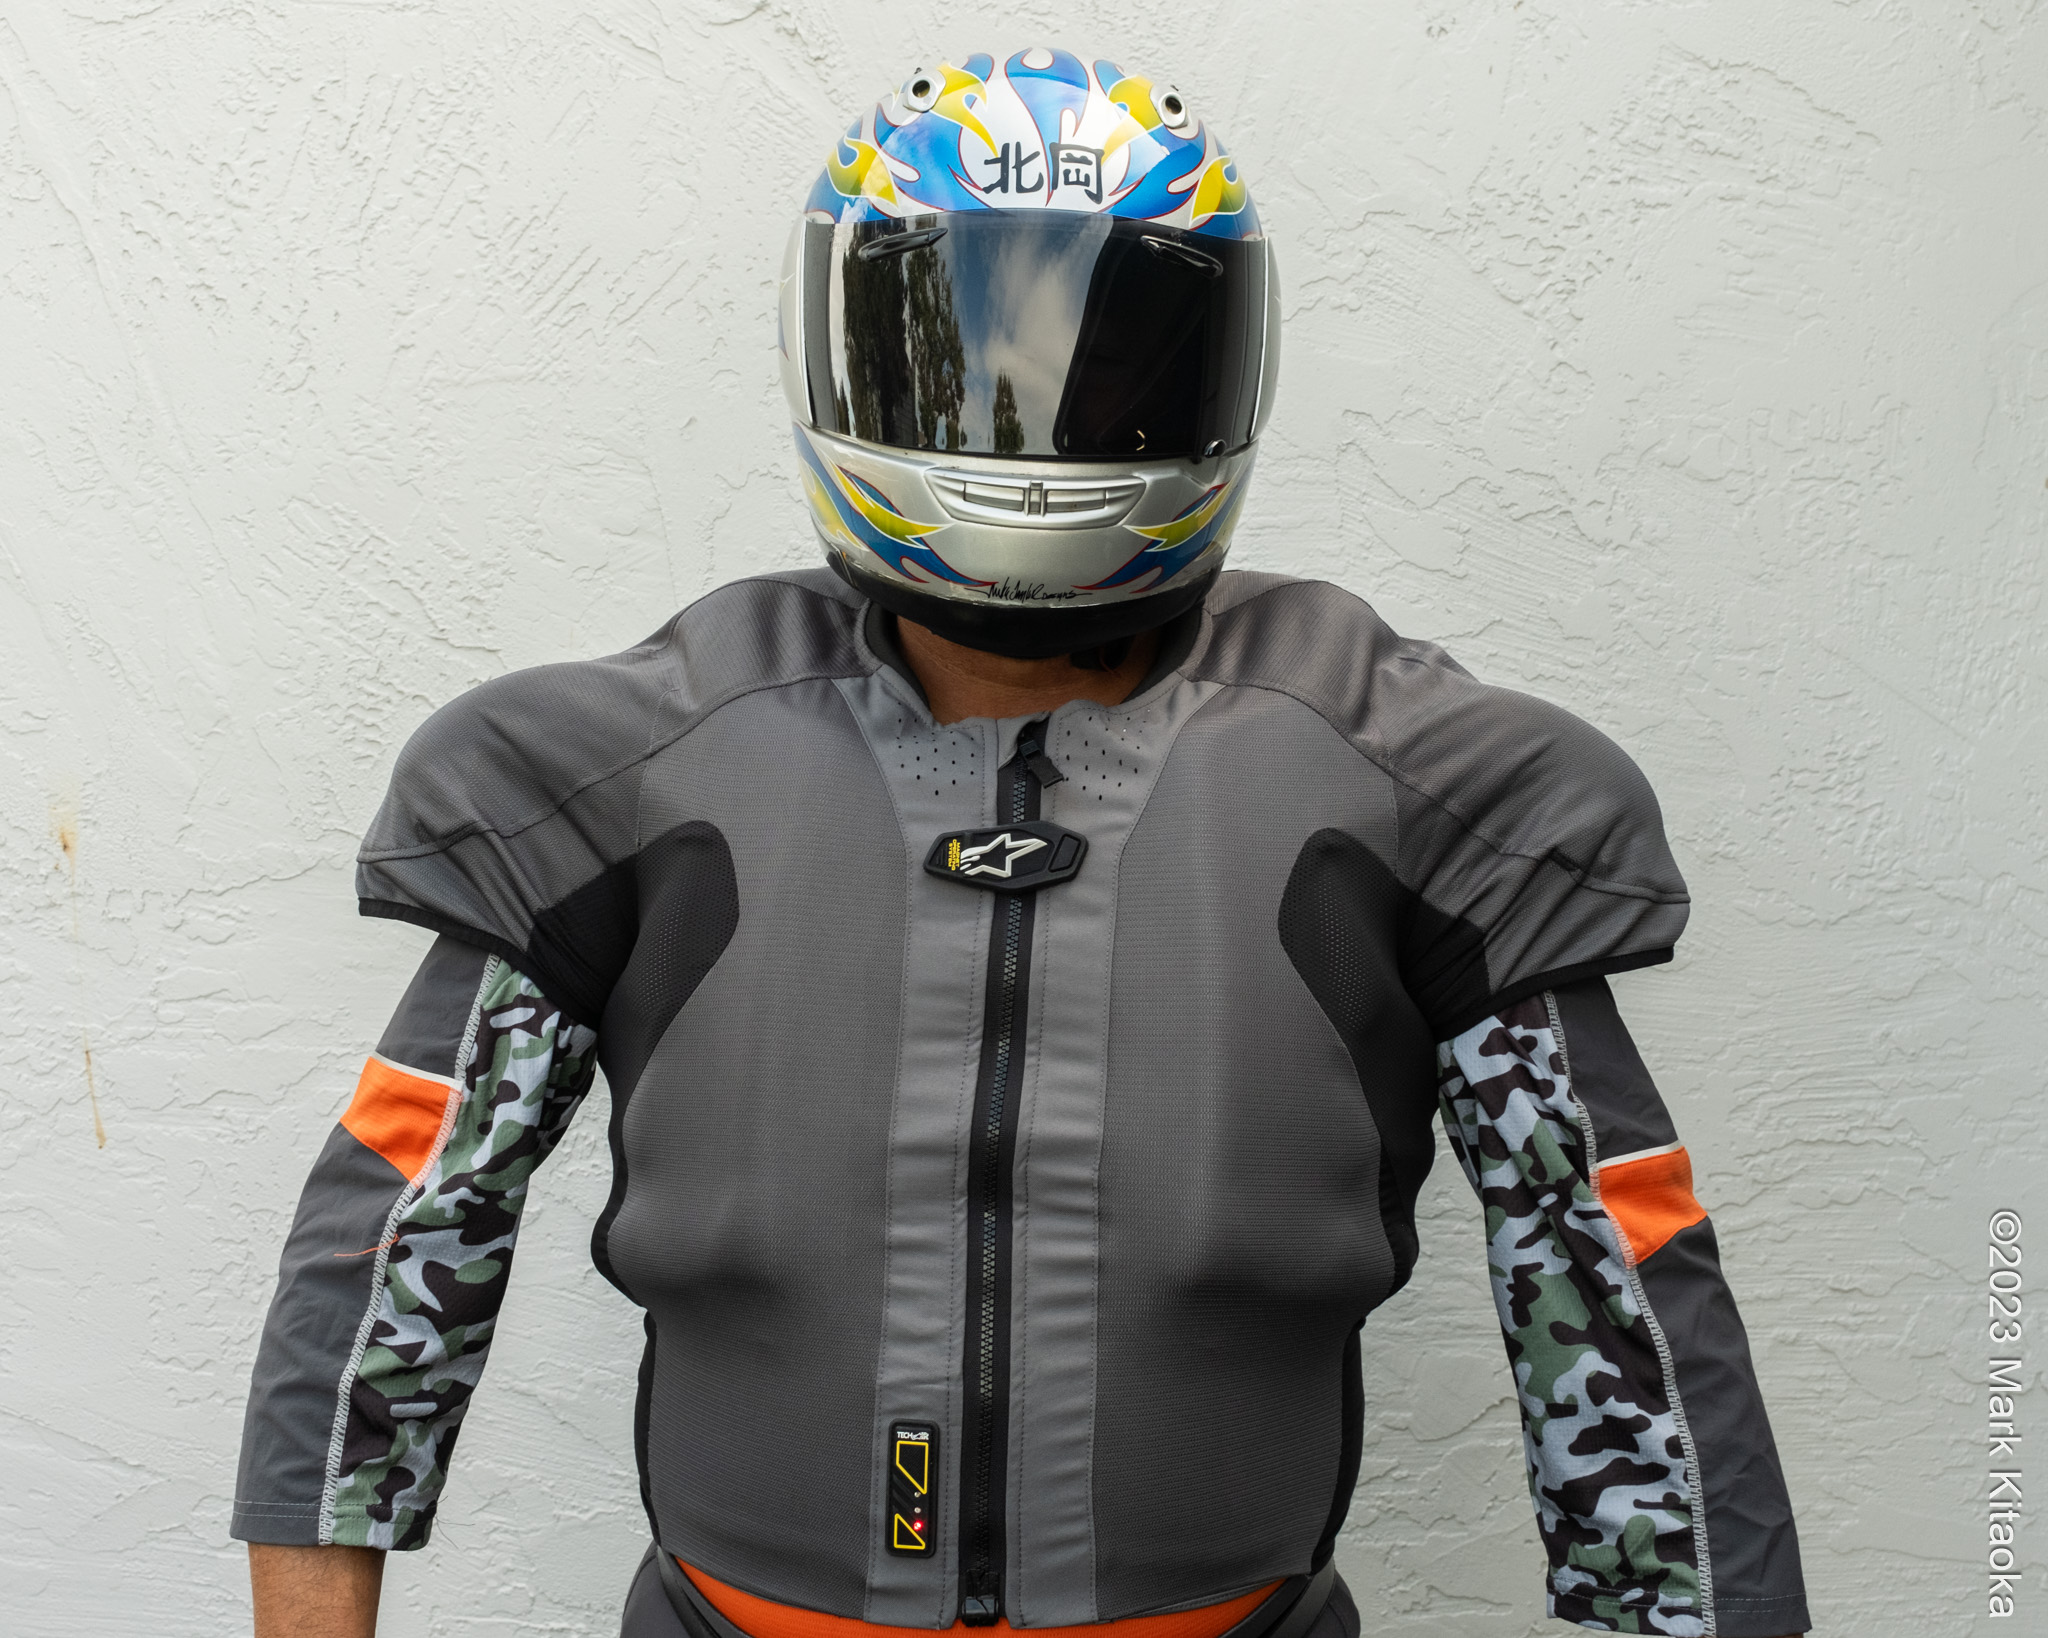 Front view of Alpinestars TechAir 5 deployed